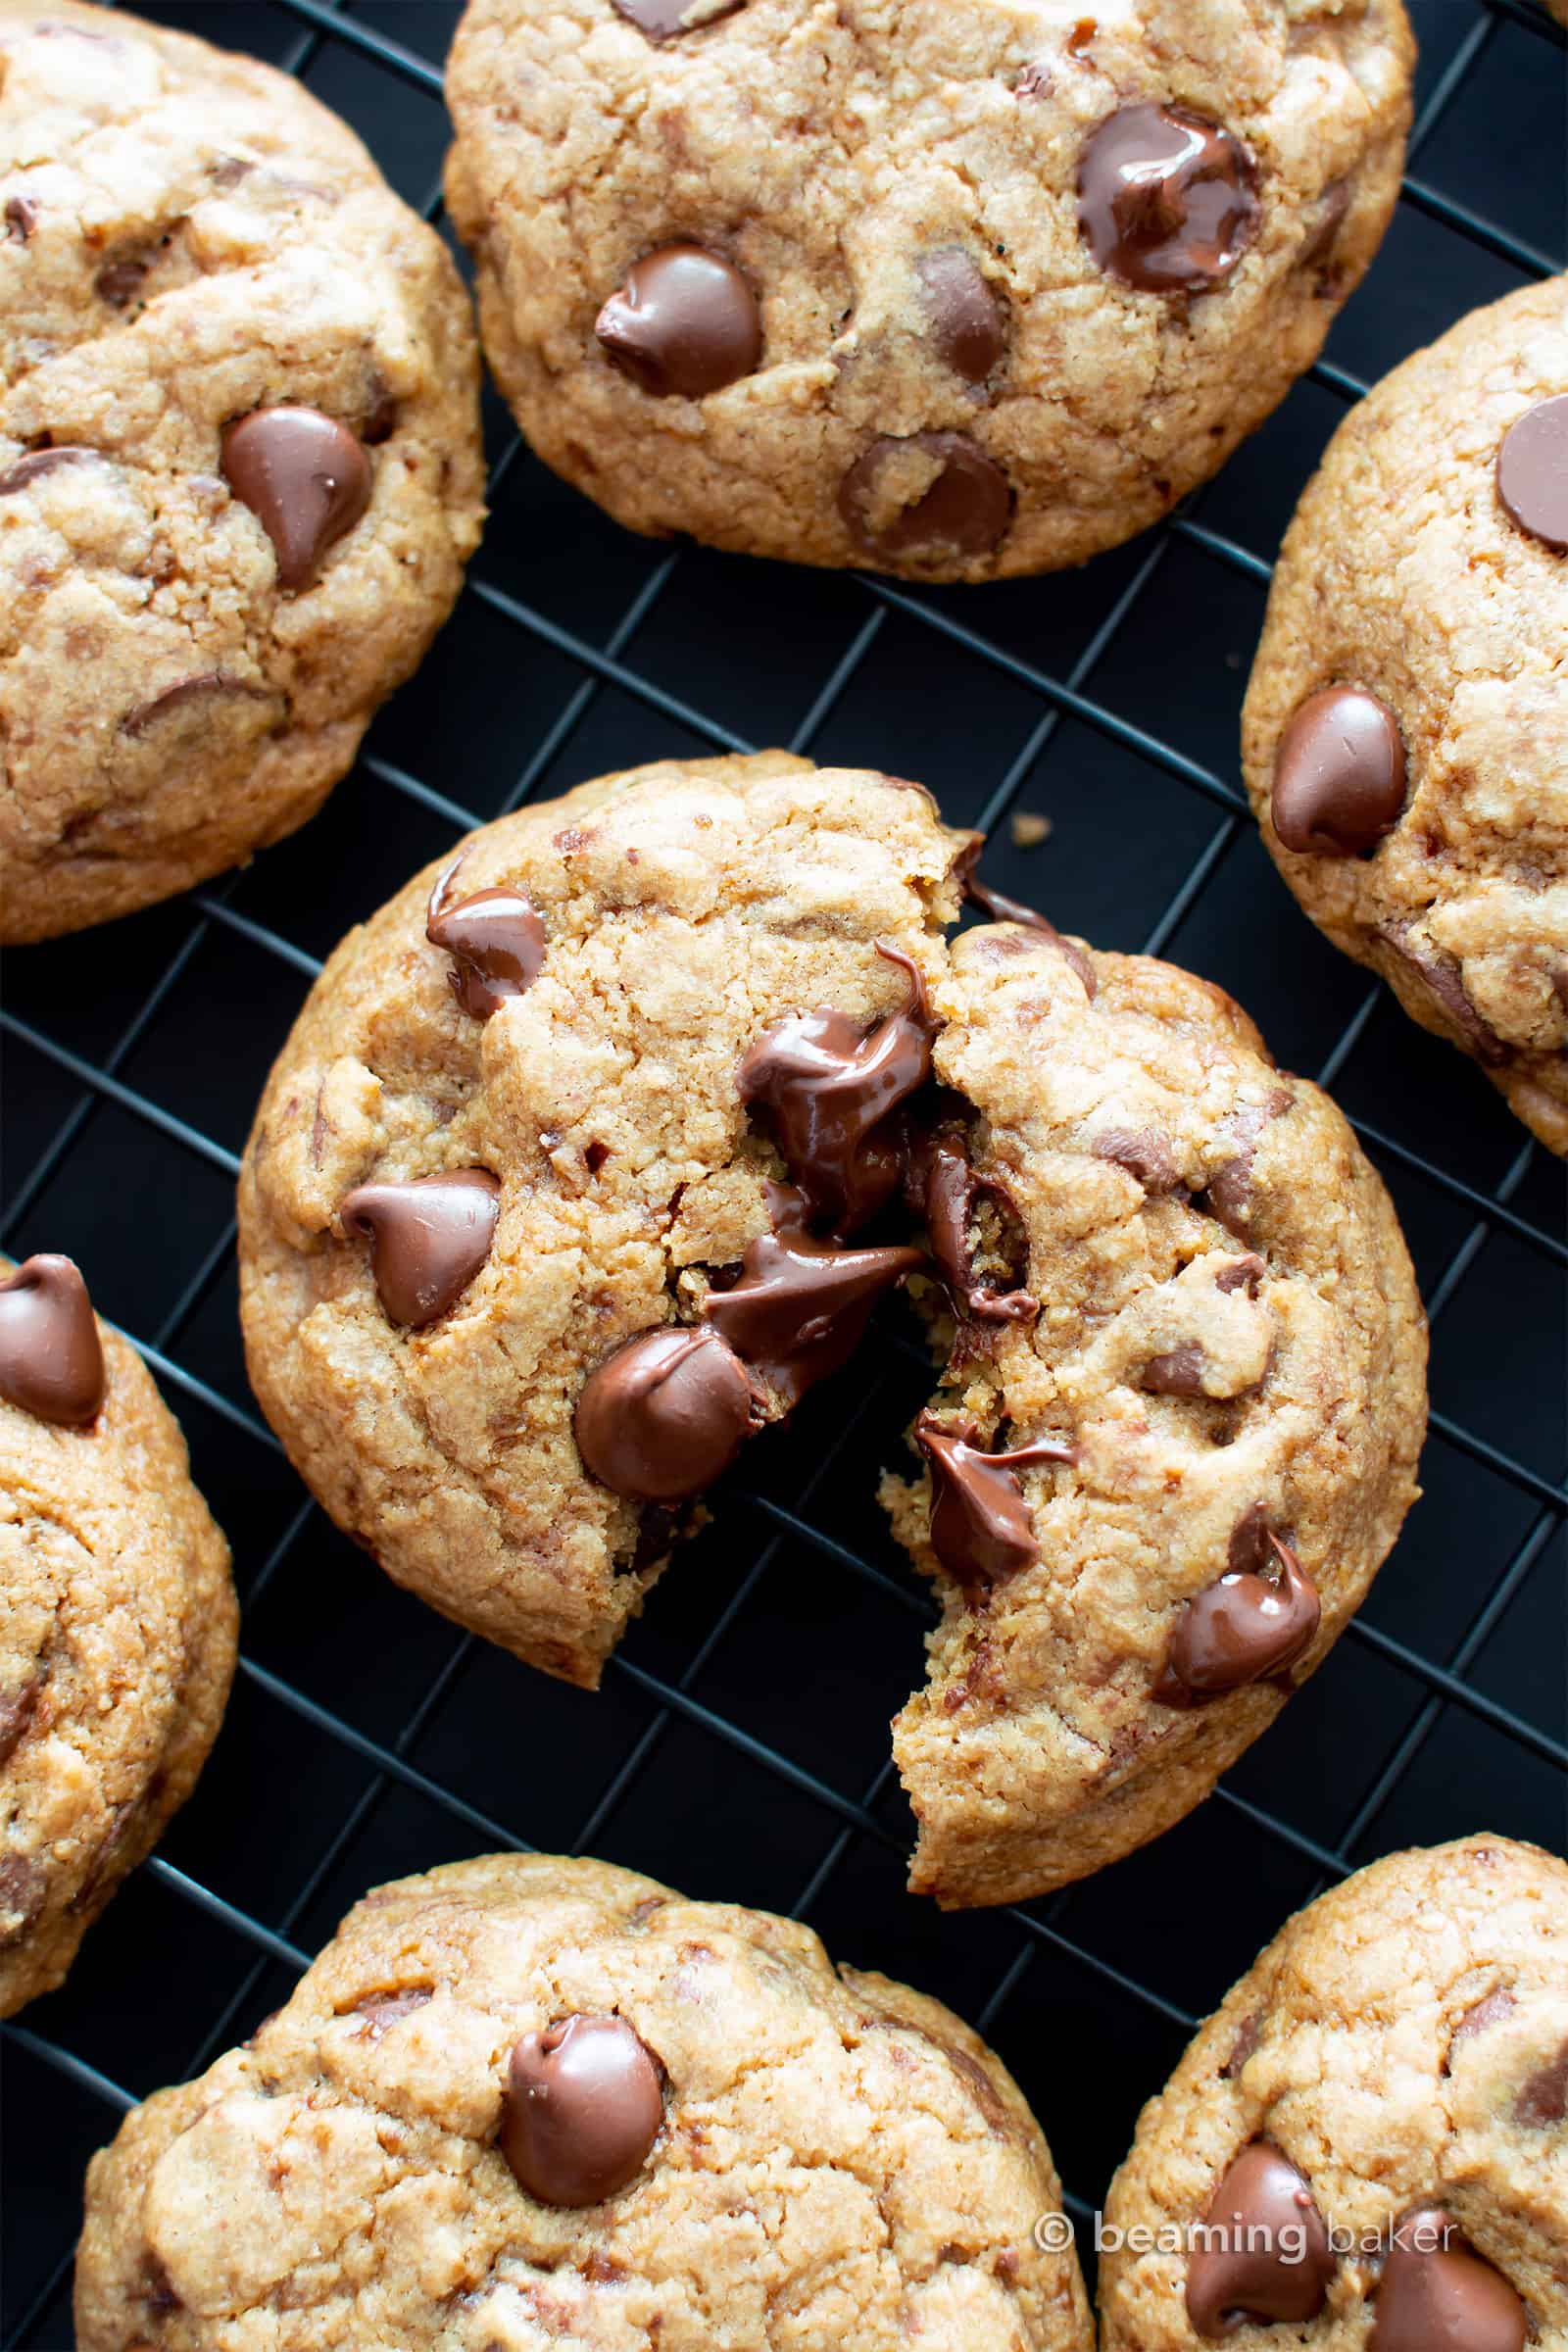 Thick and Chewy Vegan Chocolate Chip Cookies Recipe: the best vegan chocolate chip cookies—gluten free, delicious, easy! Thick chocolate chip cookies with crispy edges, chewy, soft centers, bursting with chocolate! #GlutenFree #Vegan #Chocolate #Cookies | Recipe at BeamingBaker.com